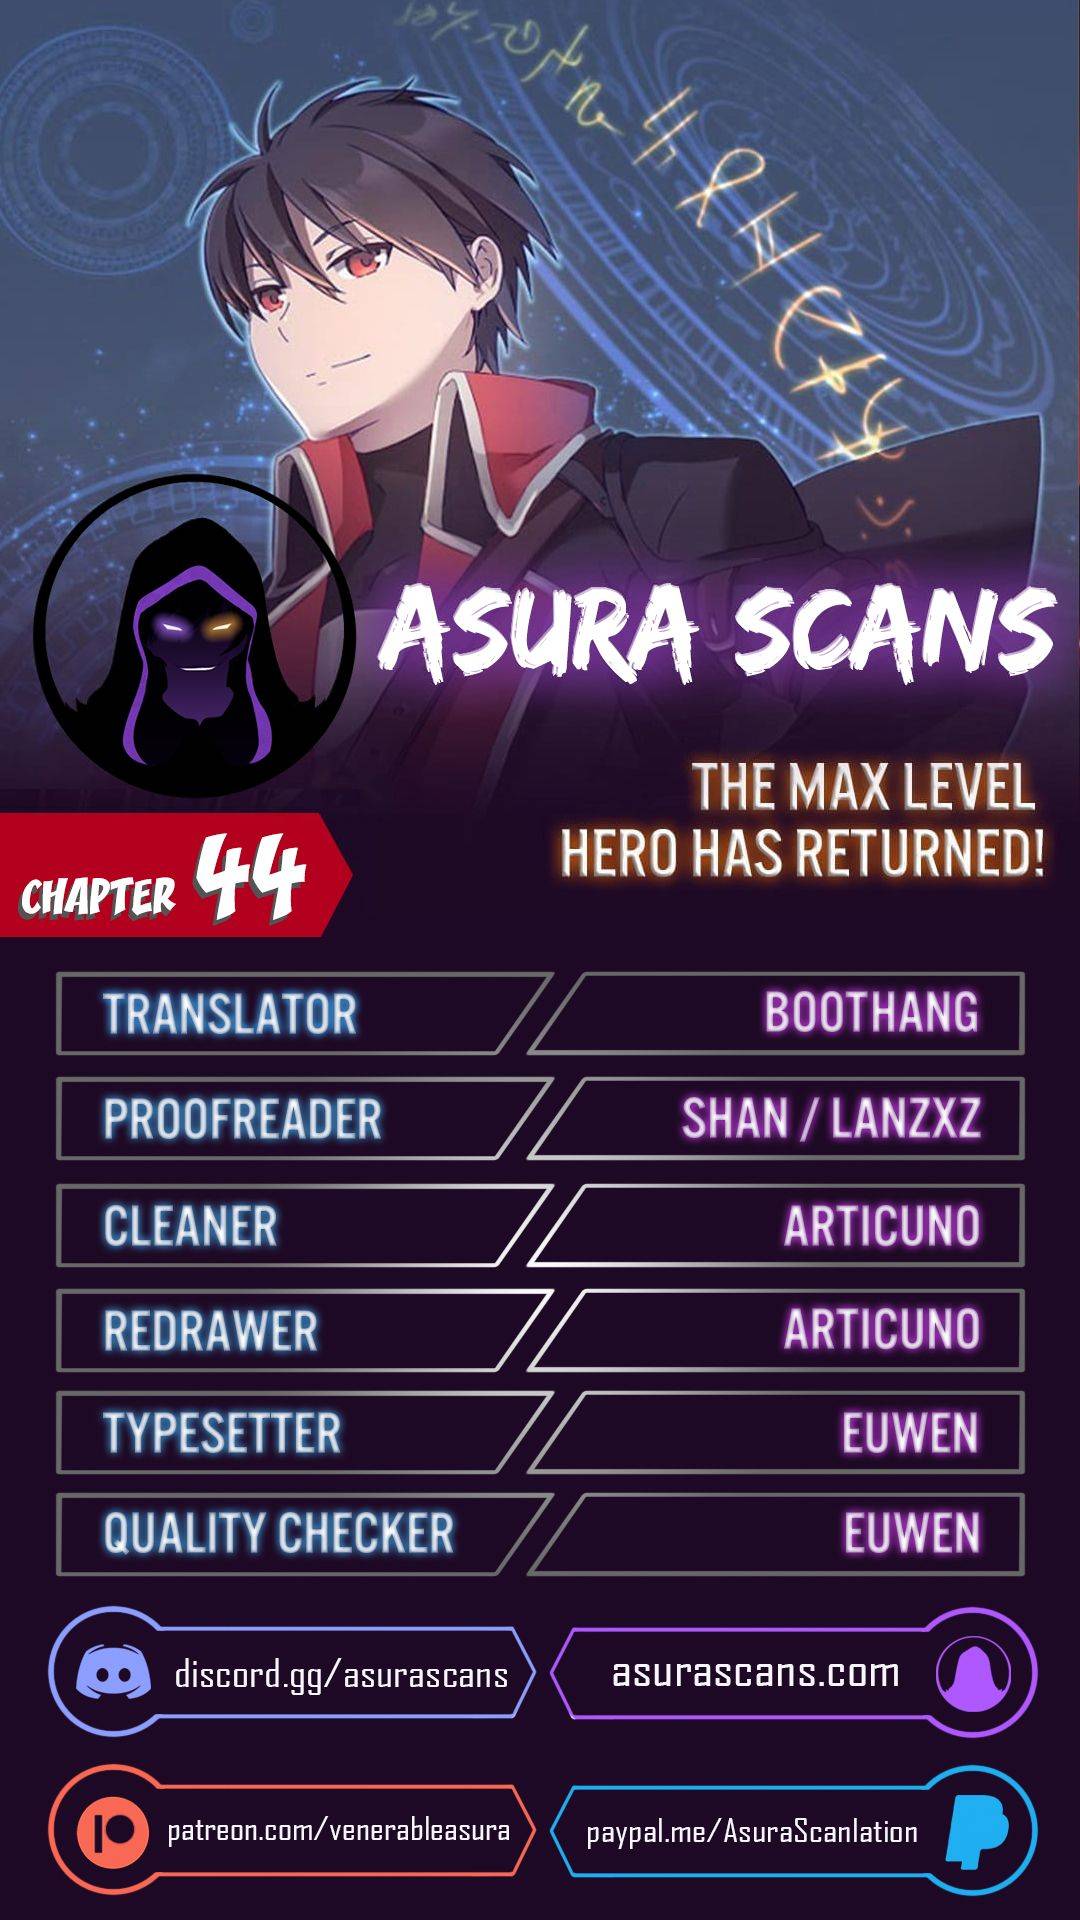 The MAX leveled hero will return! Chapter 44